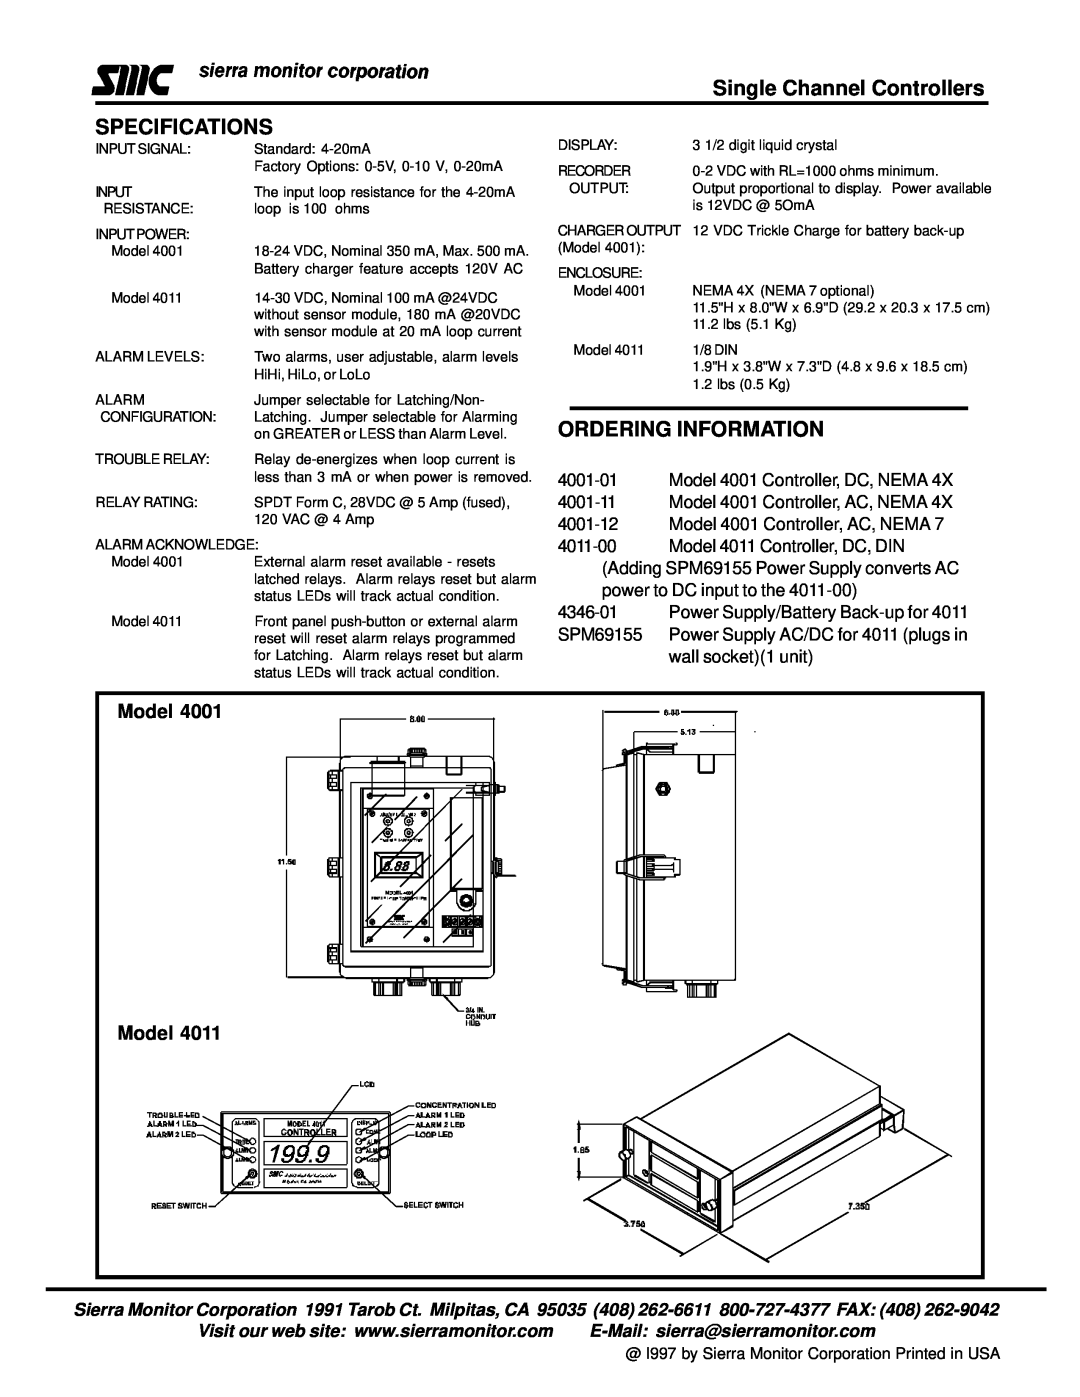 Sierra Monitor Corporation 4011, 4001 manual Single Channel Controllers SPECIFICATIONS, Ordering Information, Model 